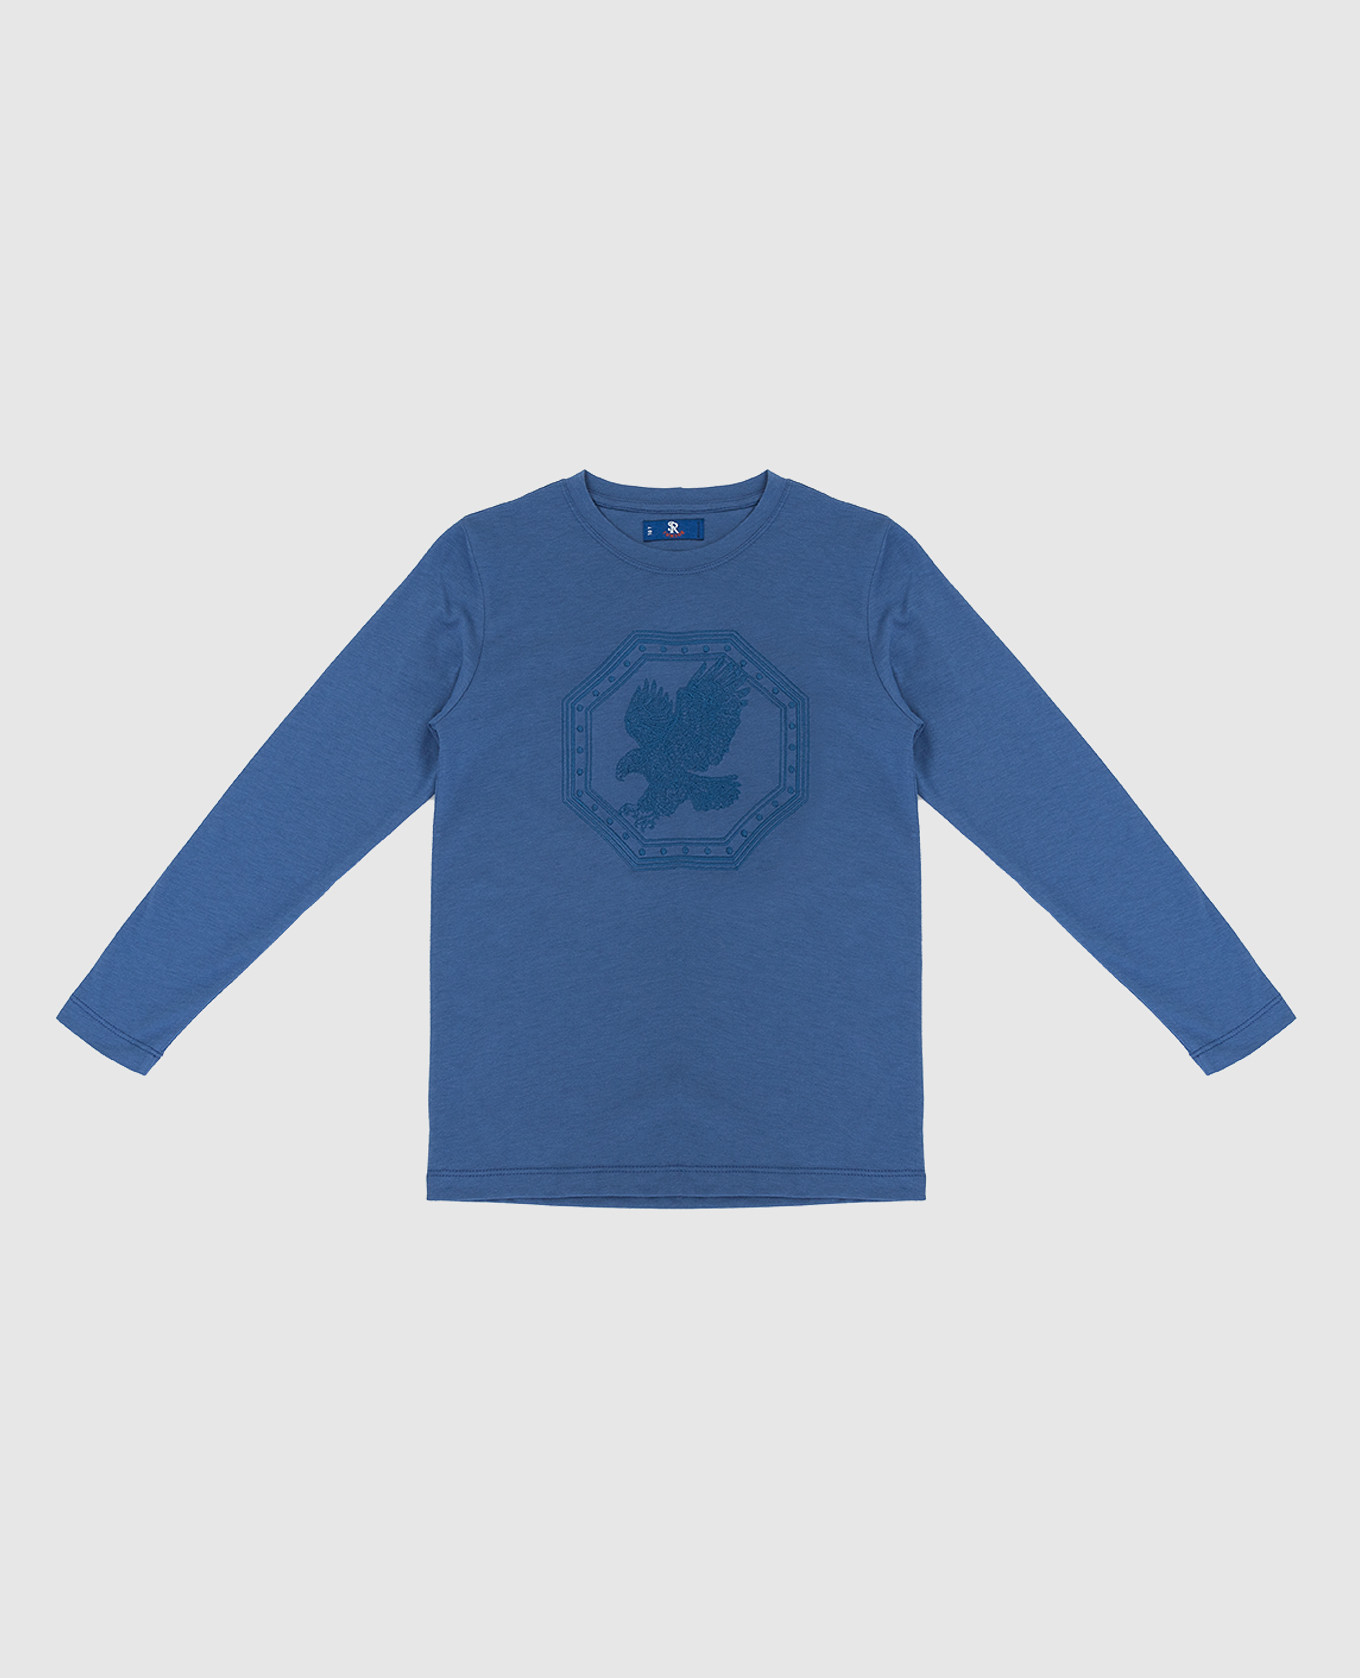 Children's longsleeve with logo embroidery